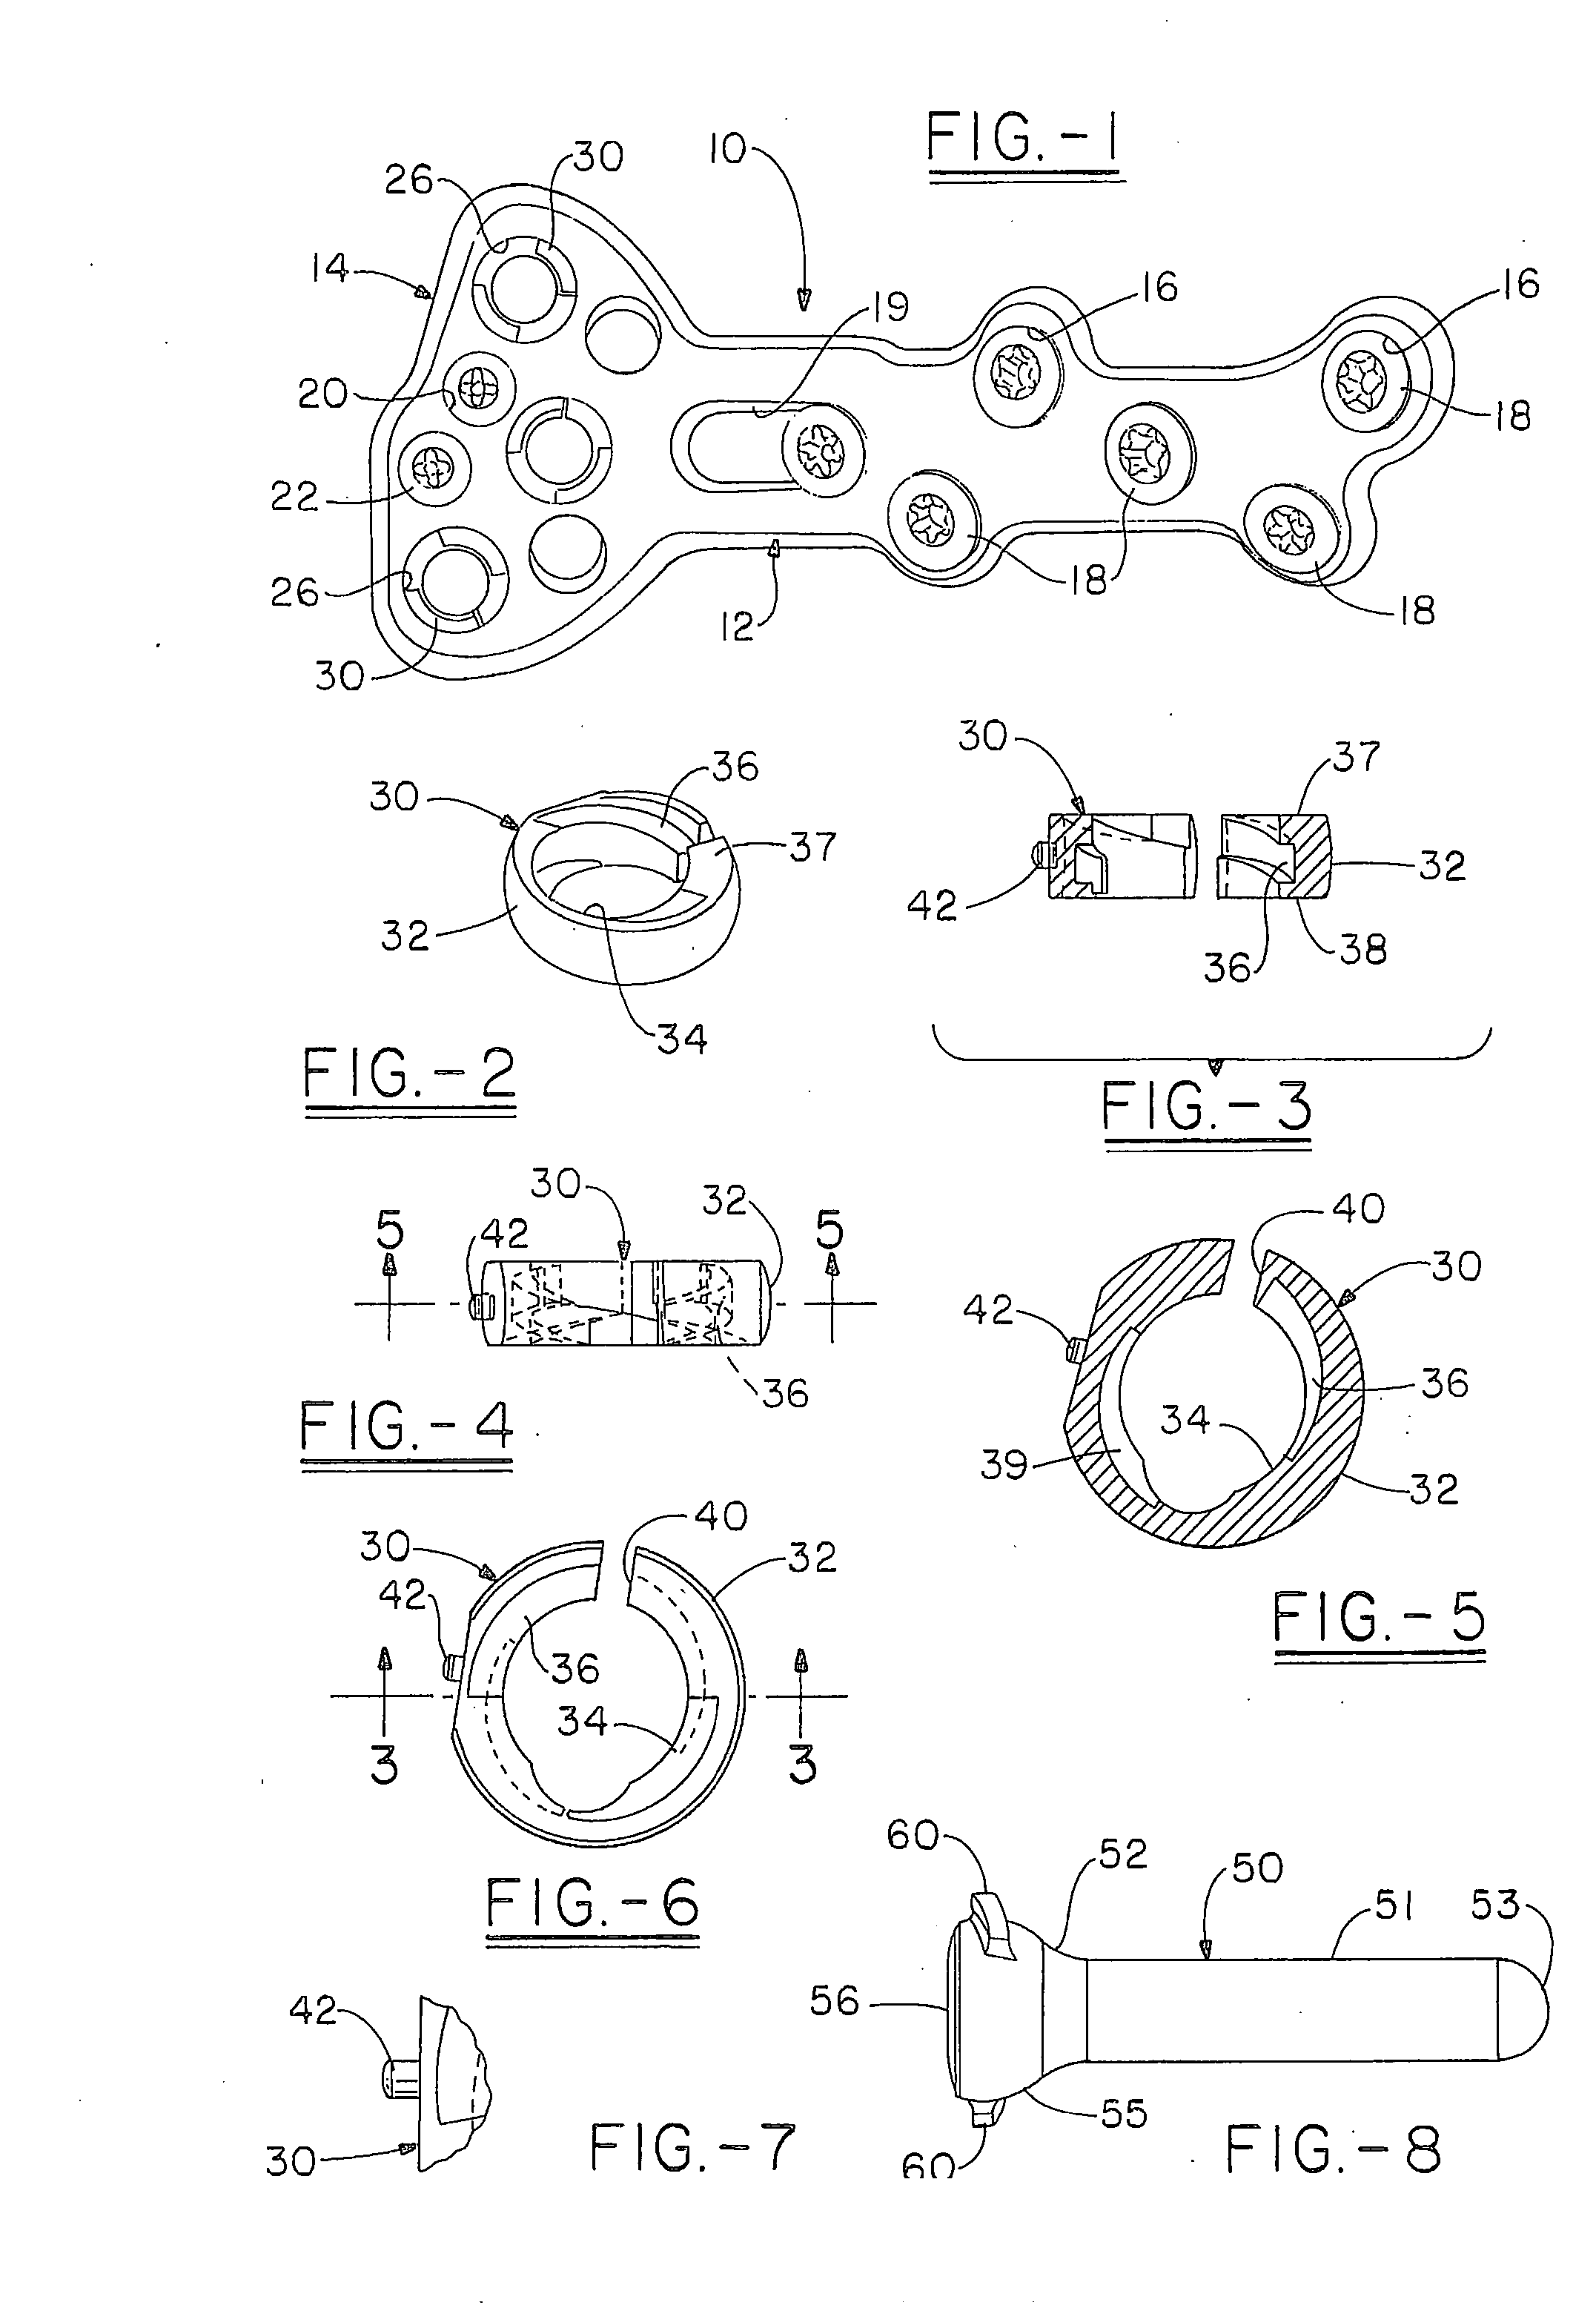 Orthopedic plate having threaded holes for locking screws or pegs and non-threaded holes for a variable axis locking mechanism